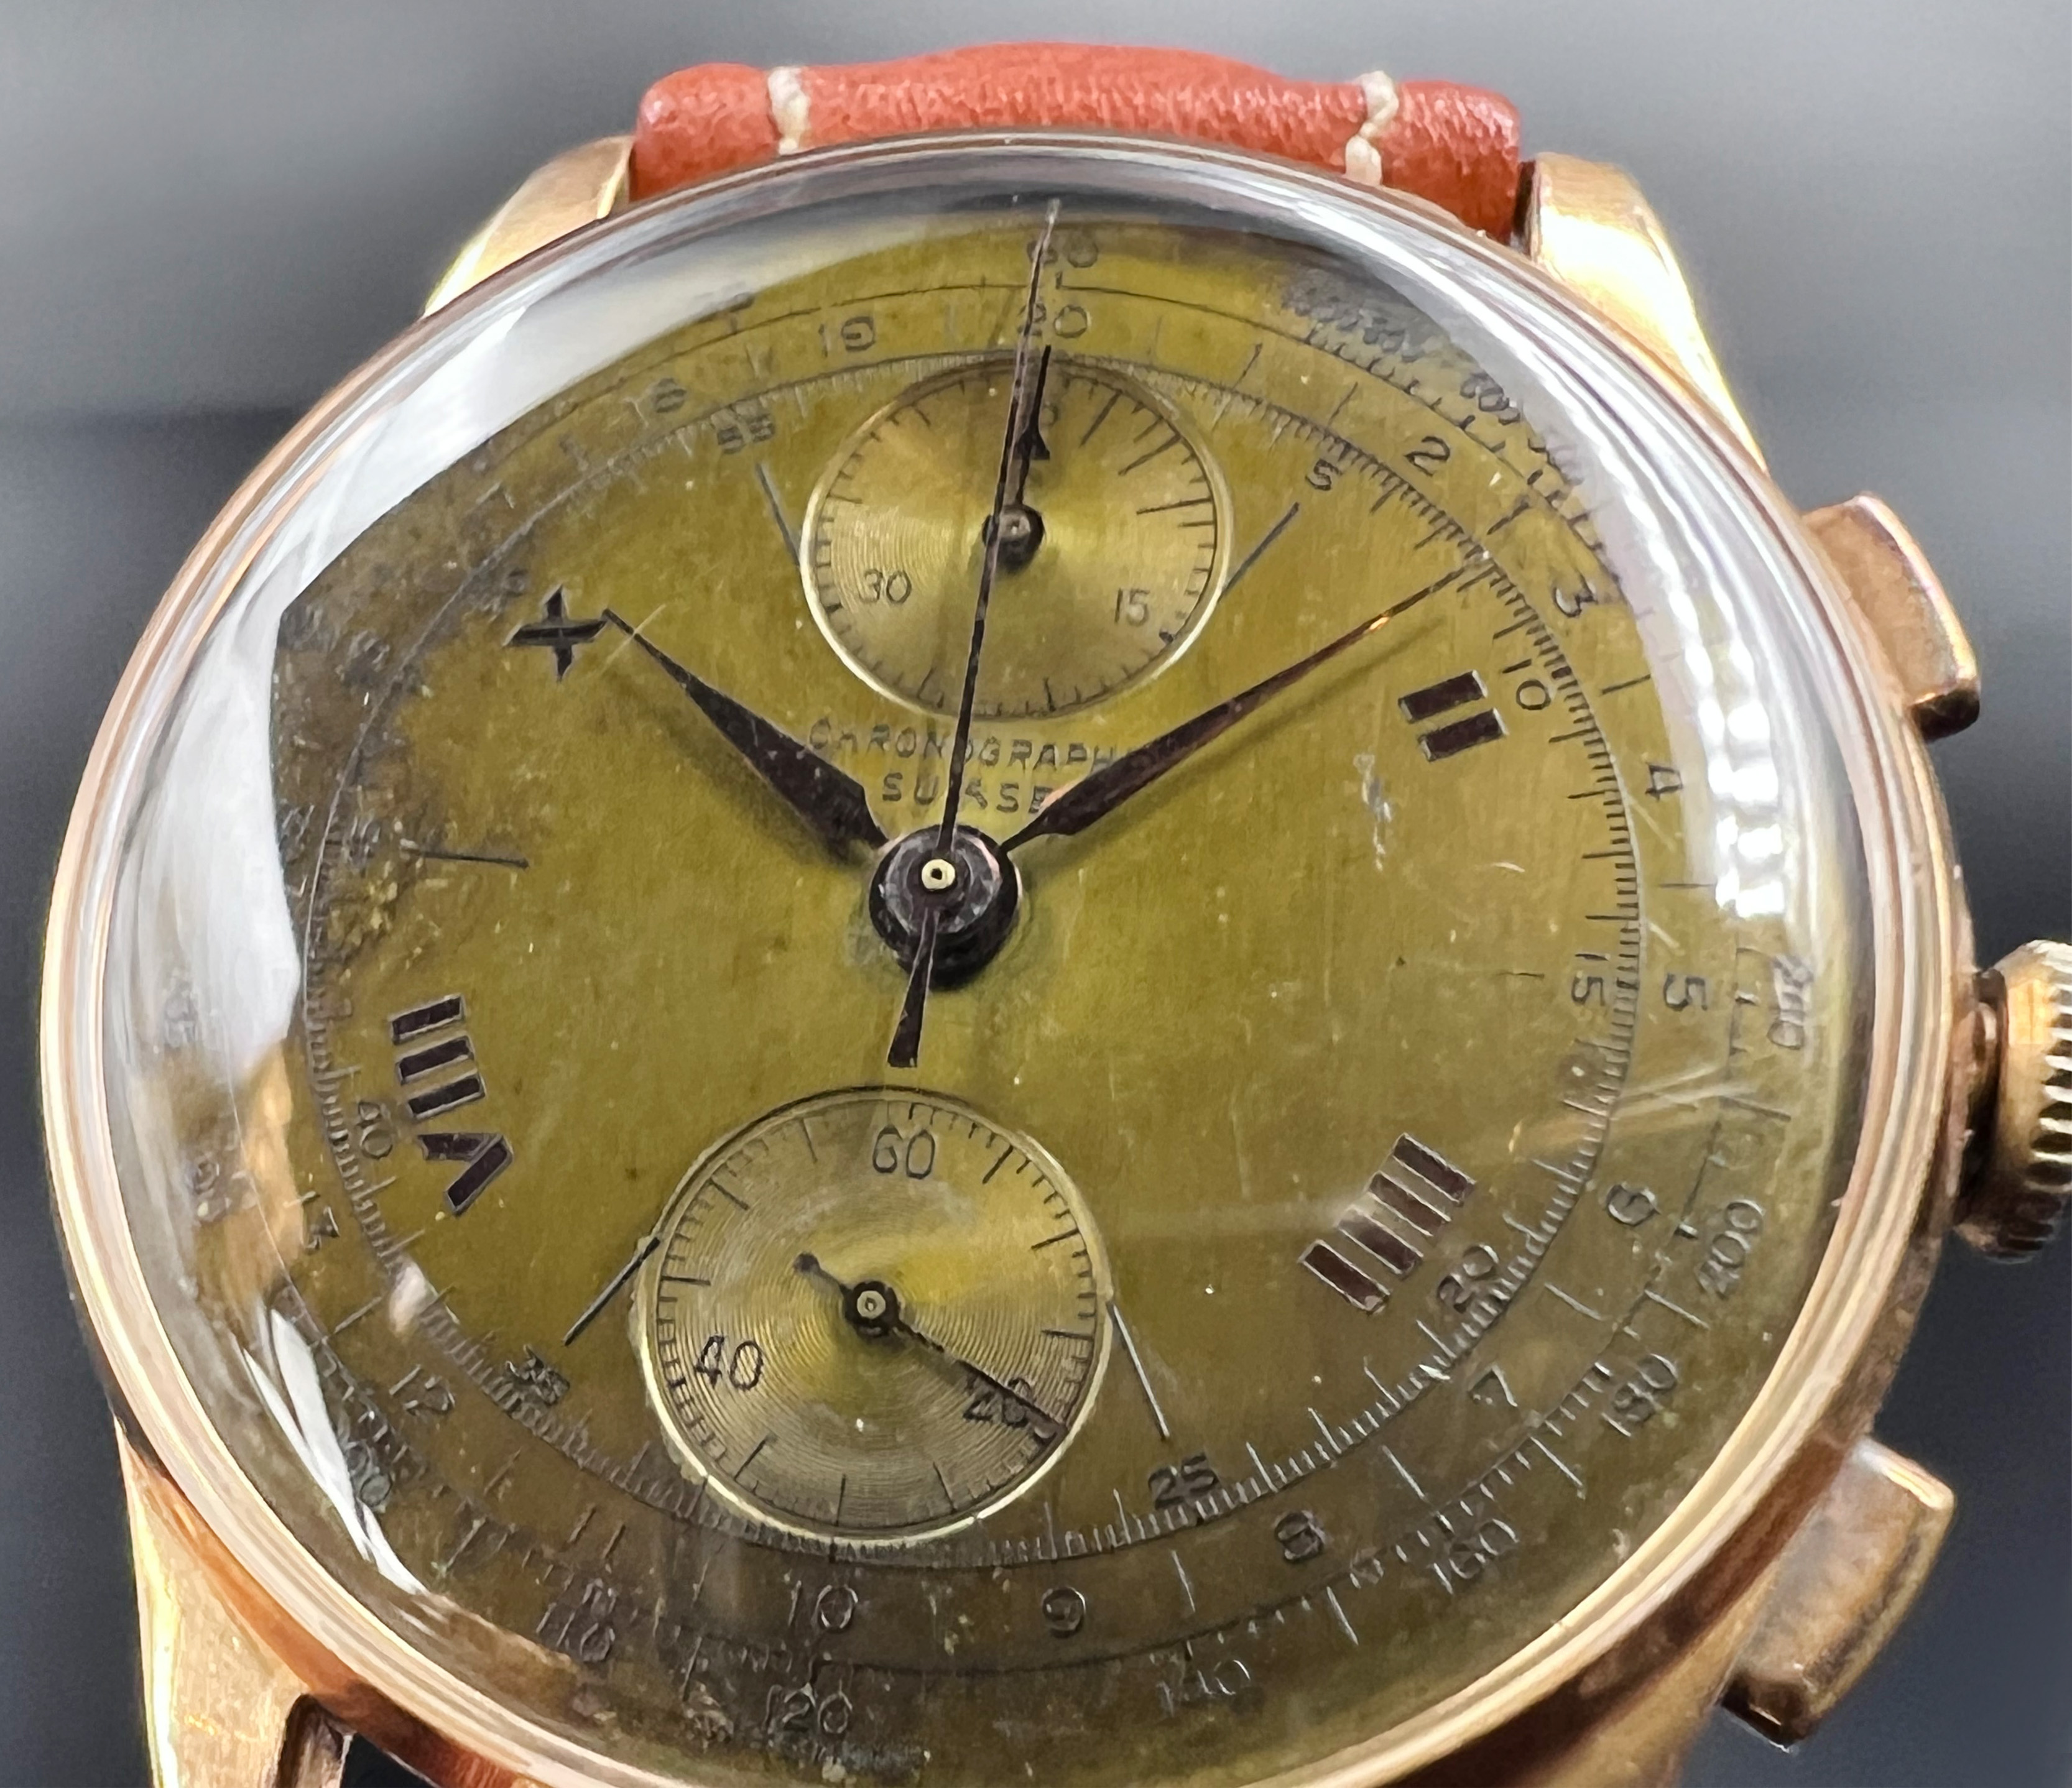 CHRONOGRAPHE SUISSE men's wristwatch. Case partly 750 yellow gold. - Image 2 of 5